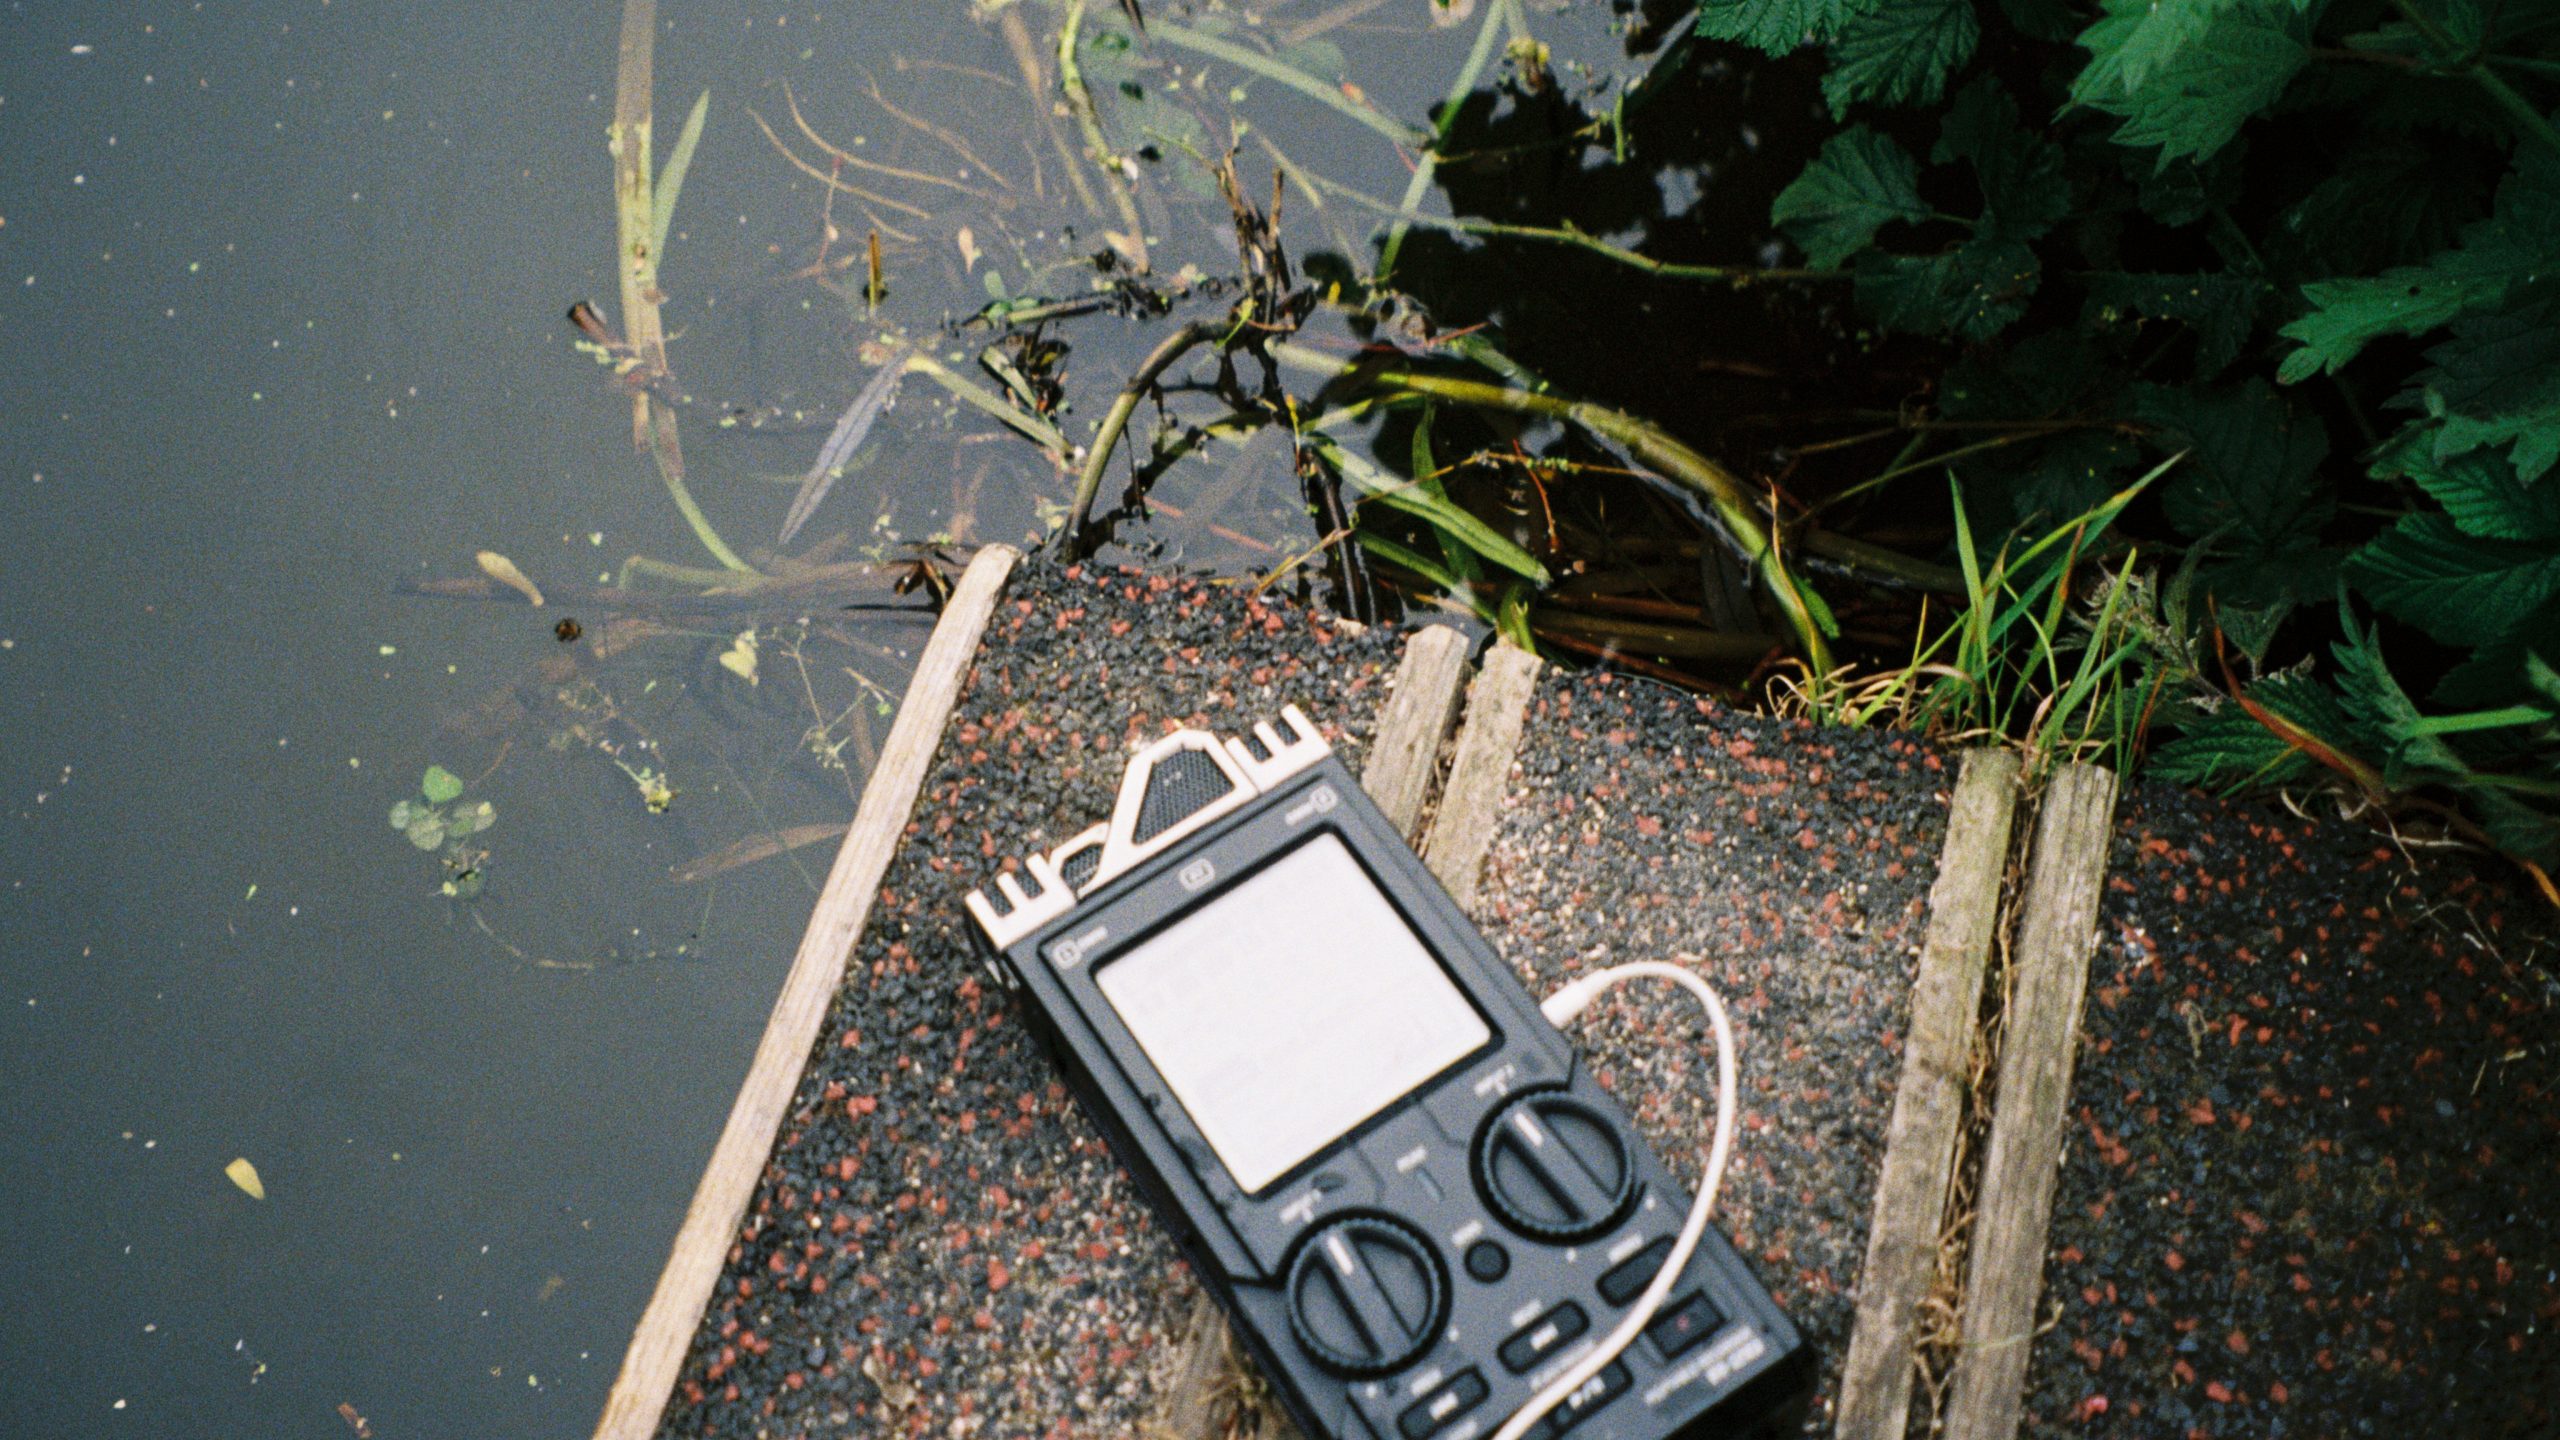 Zoom recorder lies next to canal